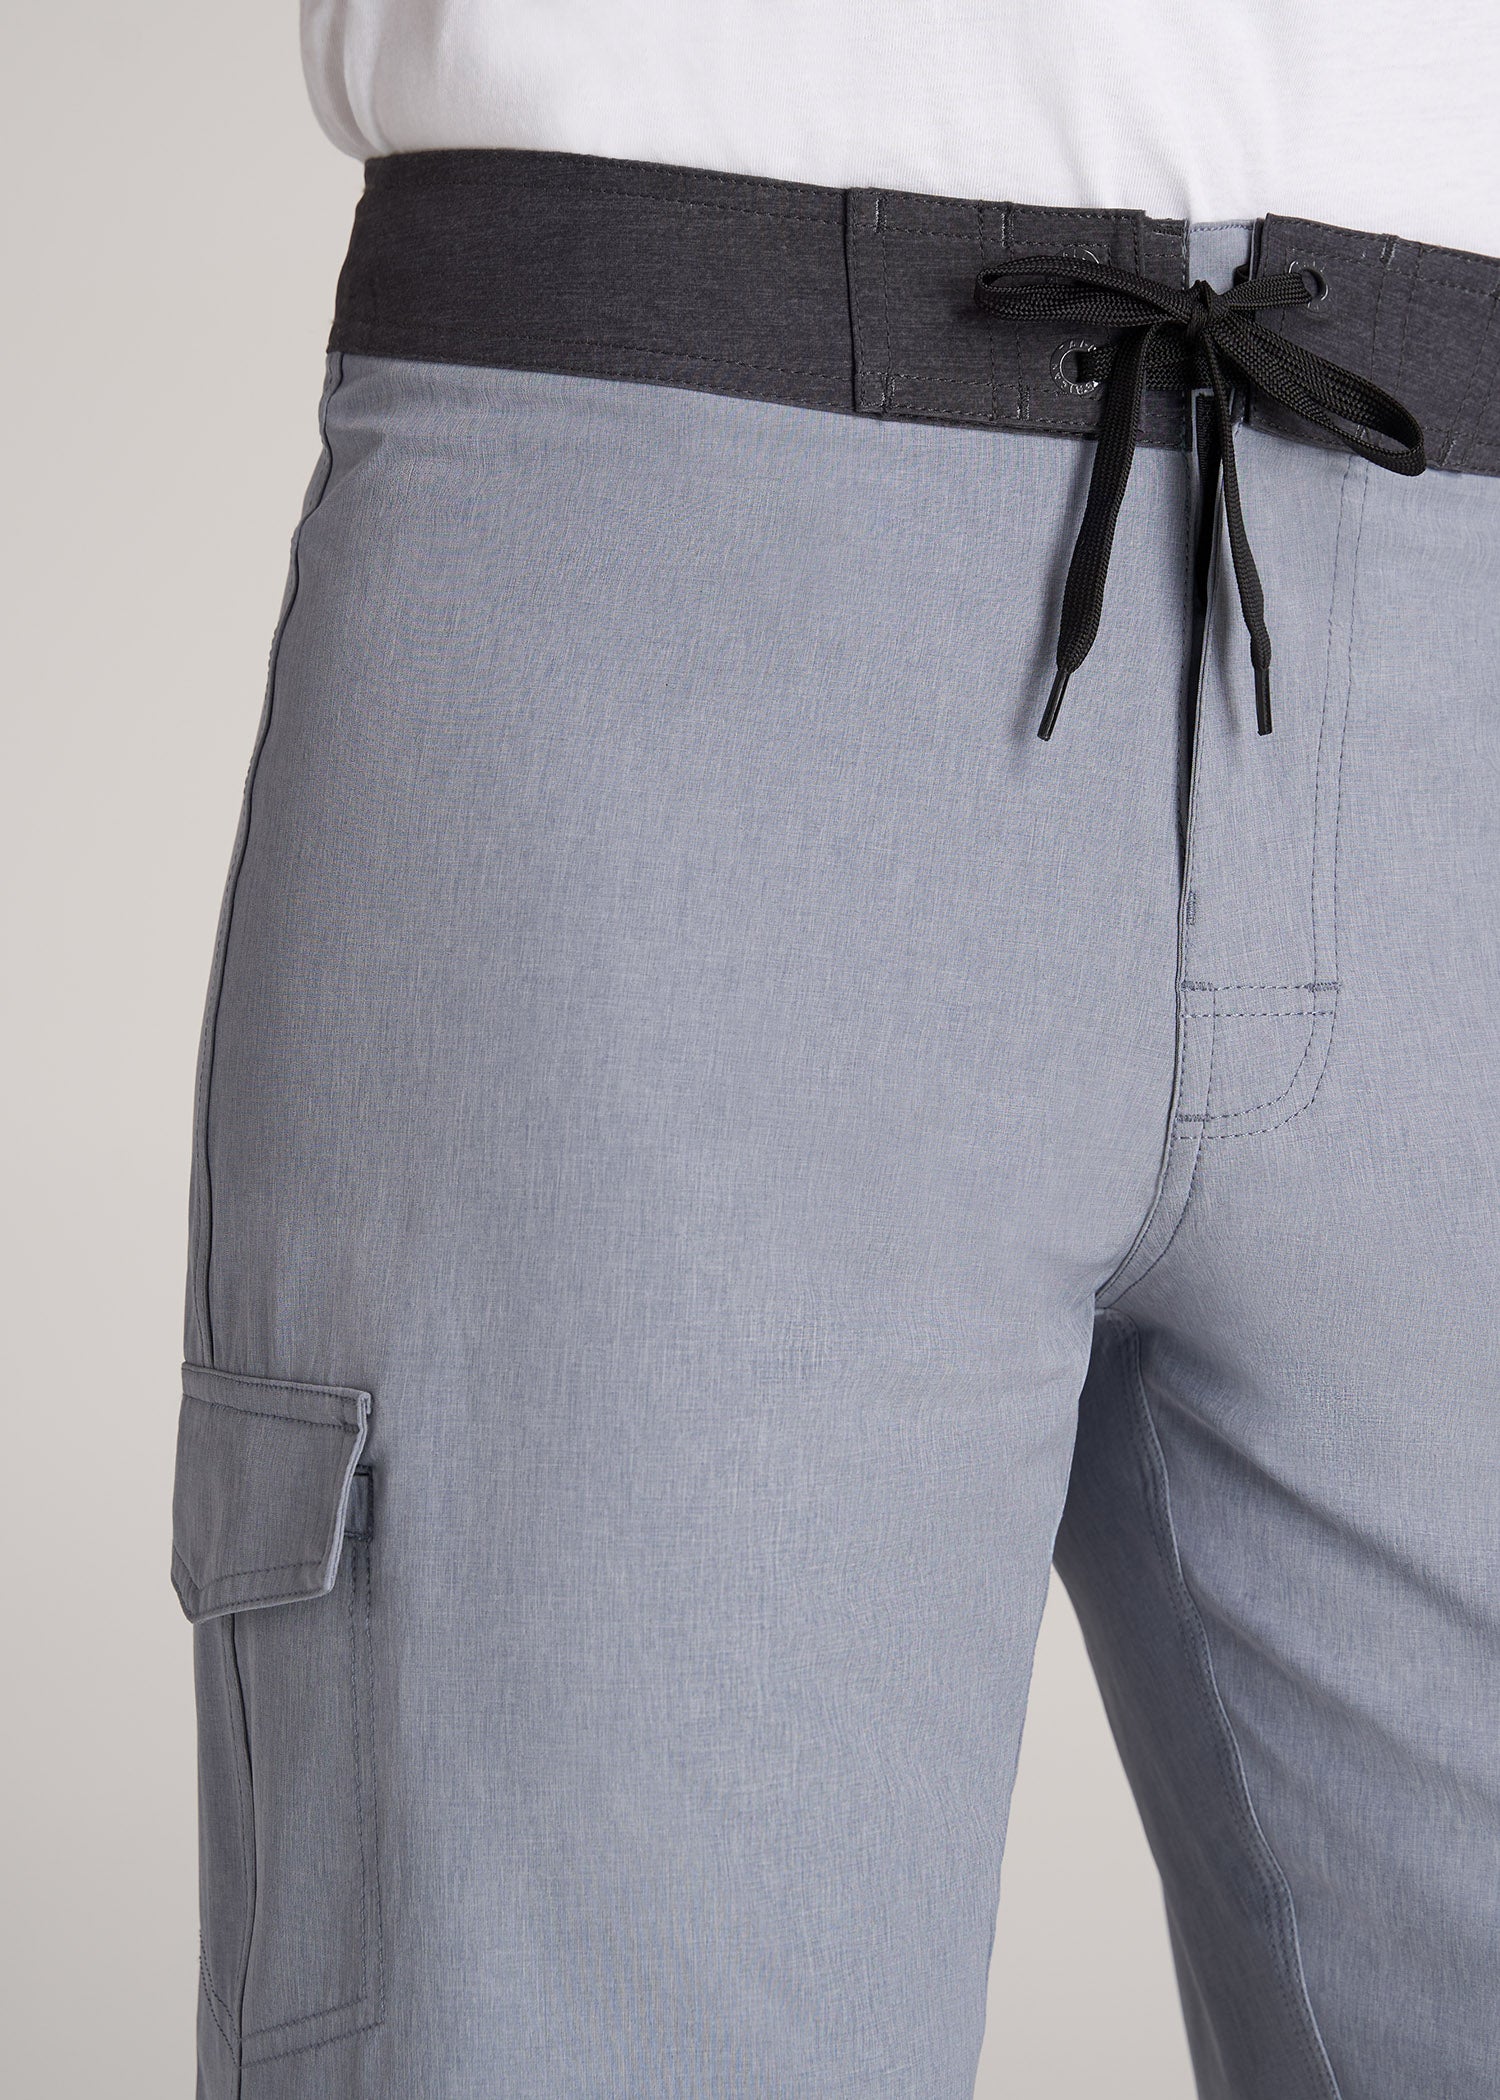    American-Tall-Men-BoardShort-HarbourGreyMix-detail